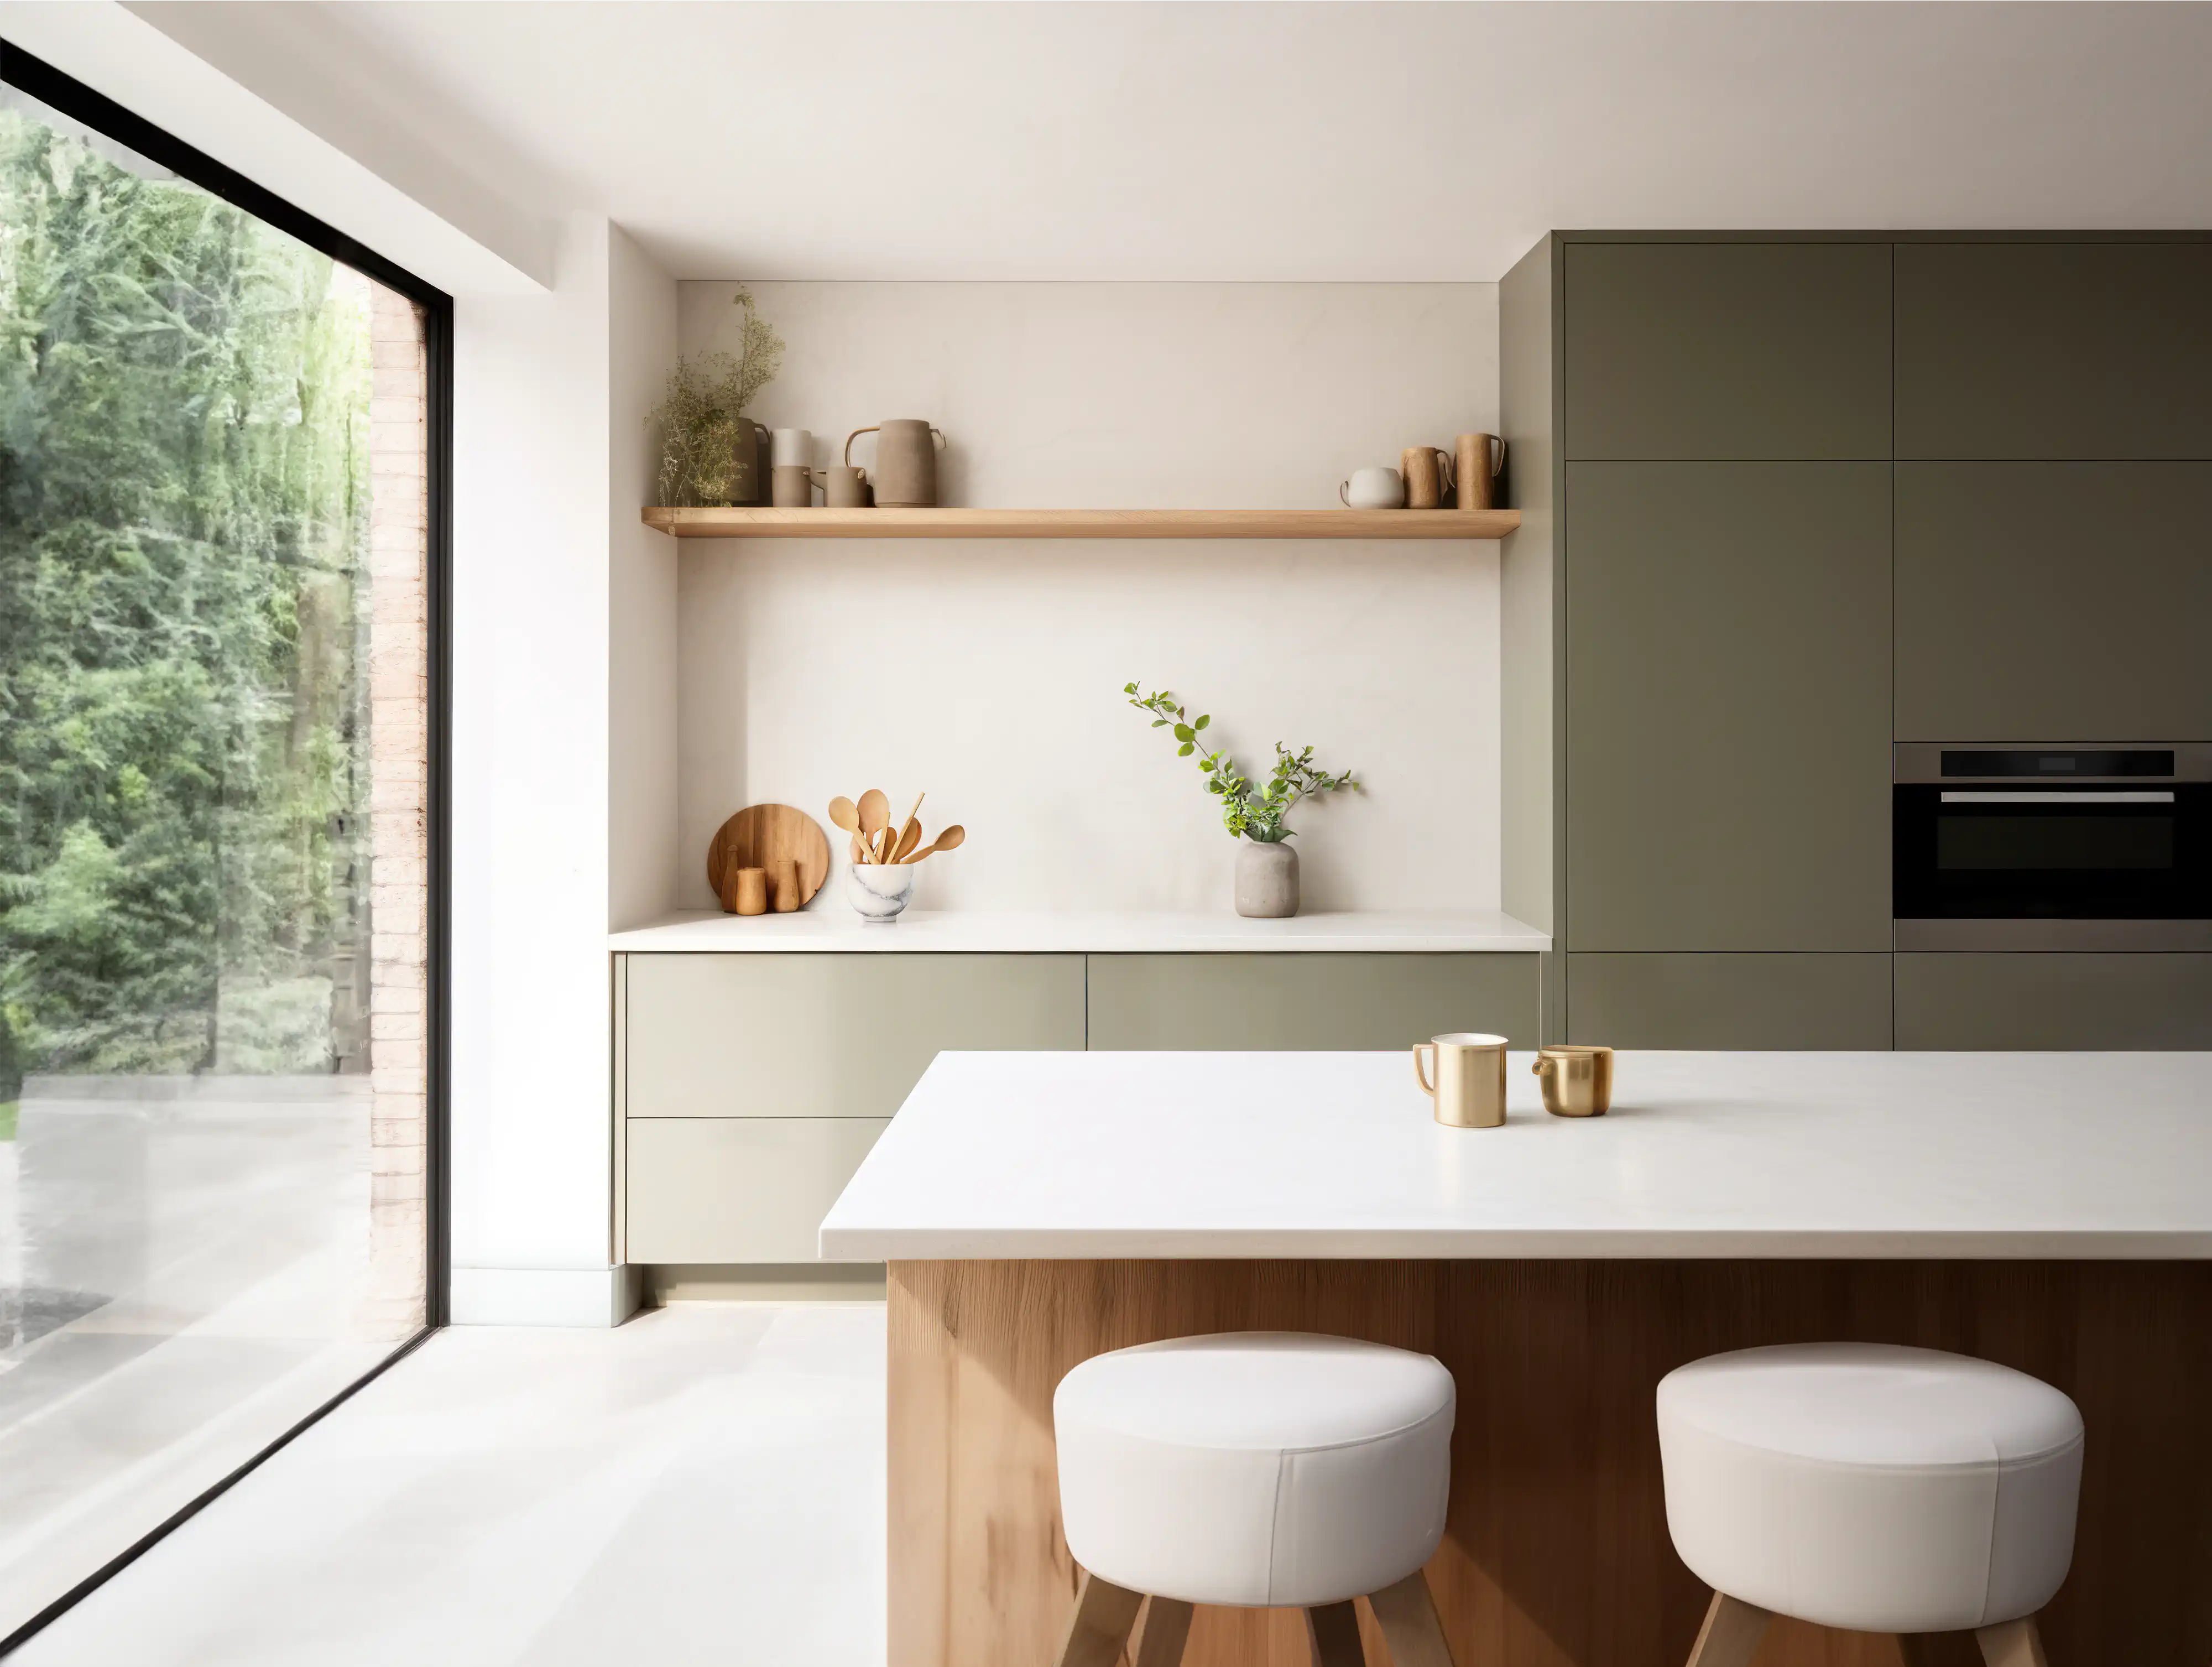 A modern kitchen with a wooden island, a greige backsplash and a window with a tree view, interior by Sarah Brown Design